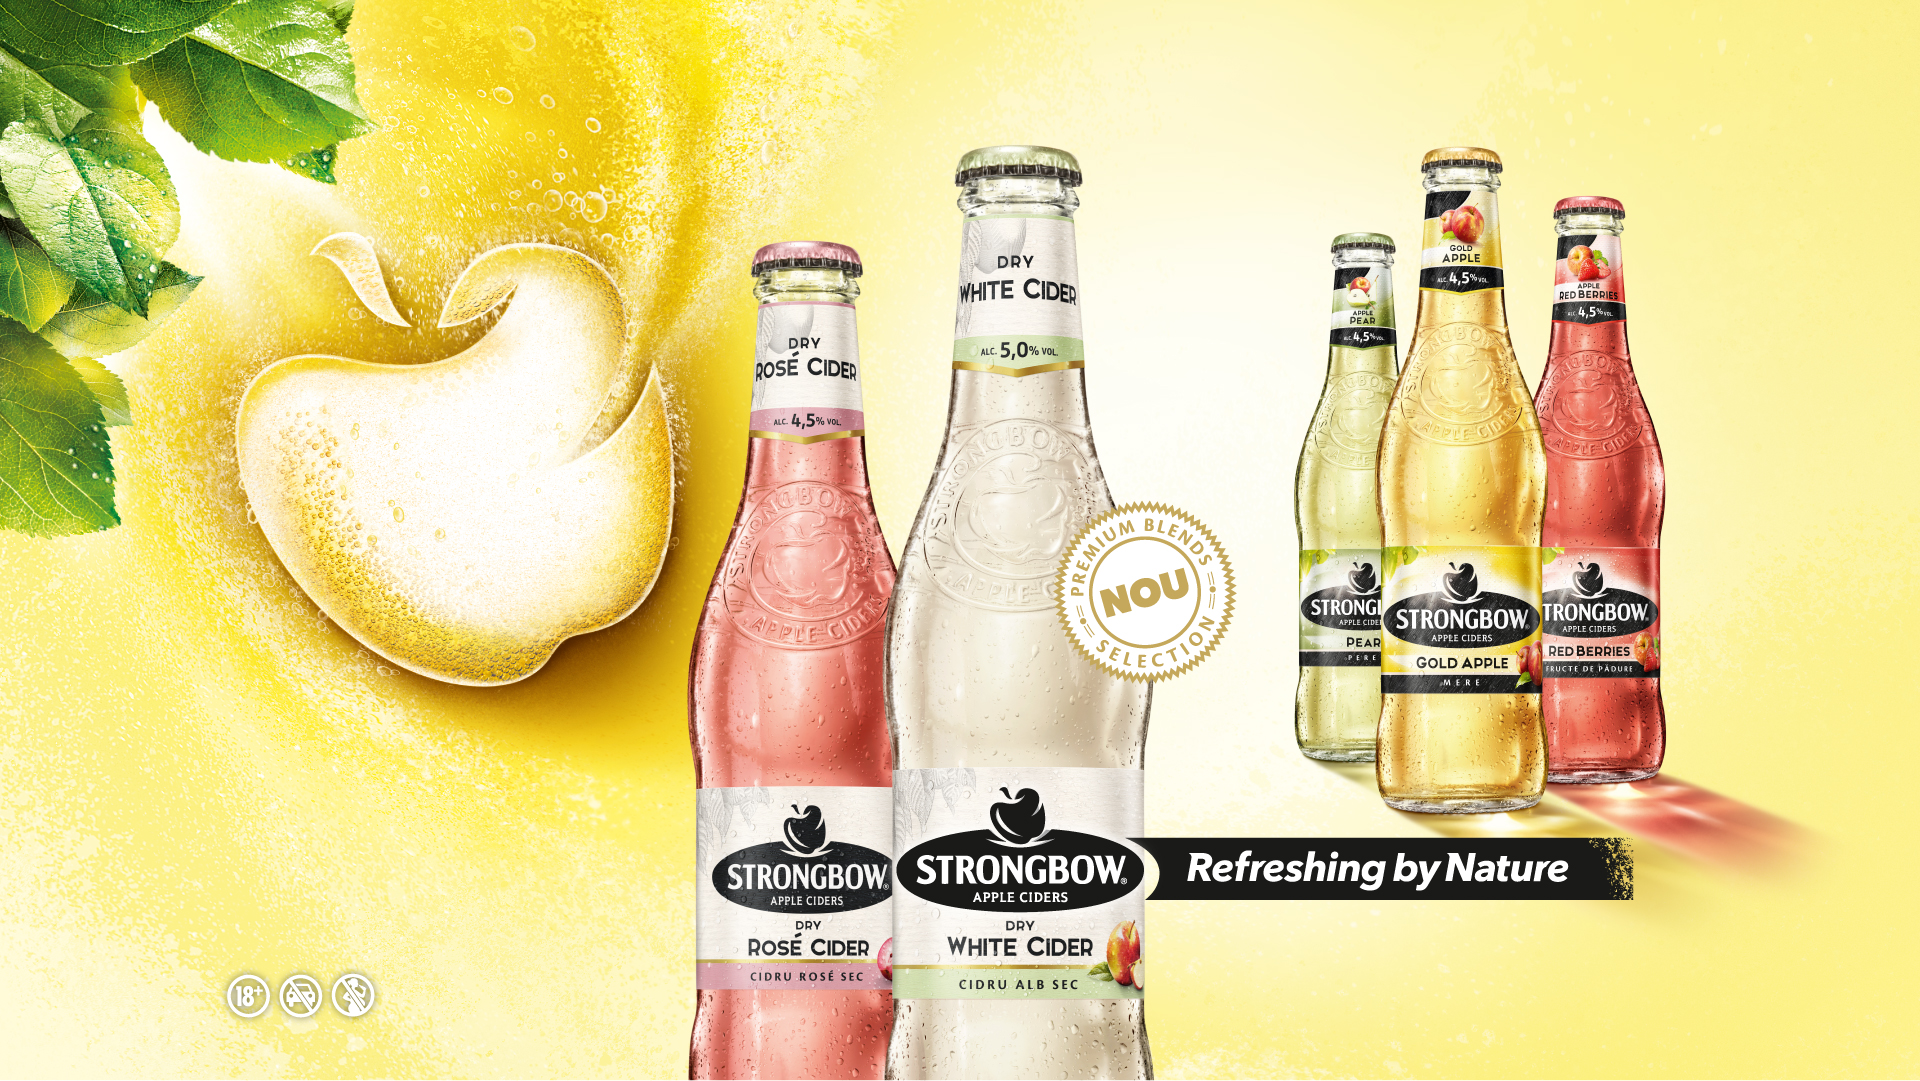 Strongbow Romania Product Lineup Bottles 1920X1080